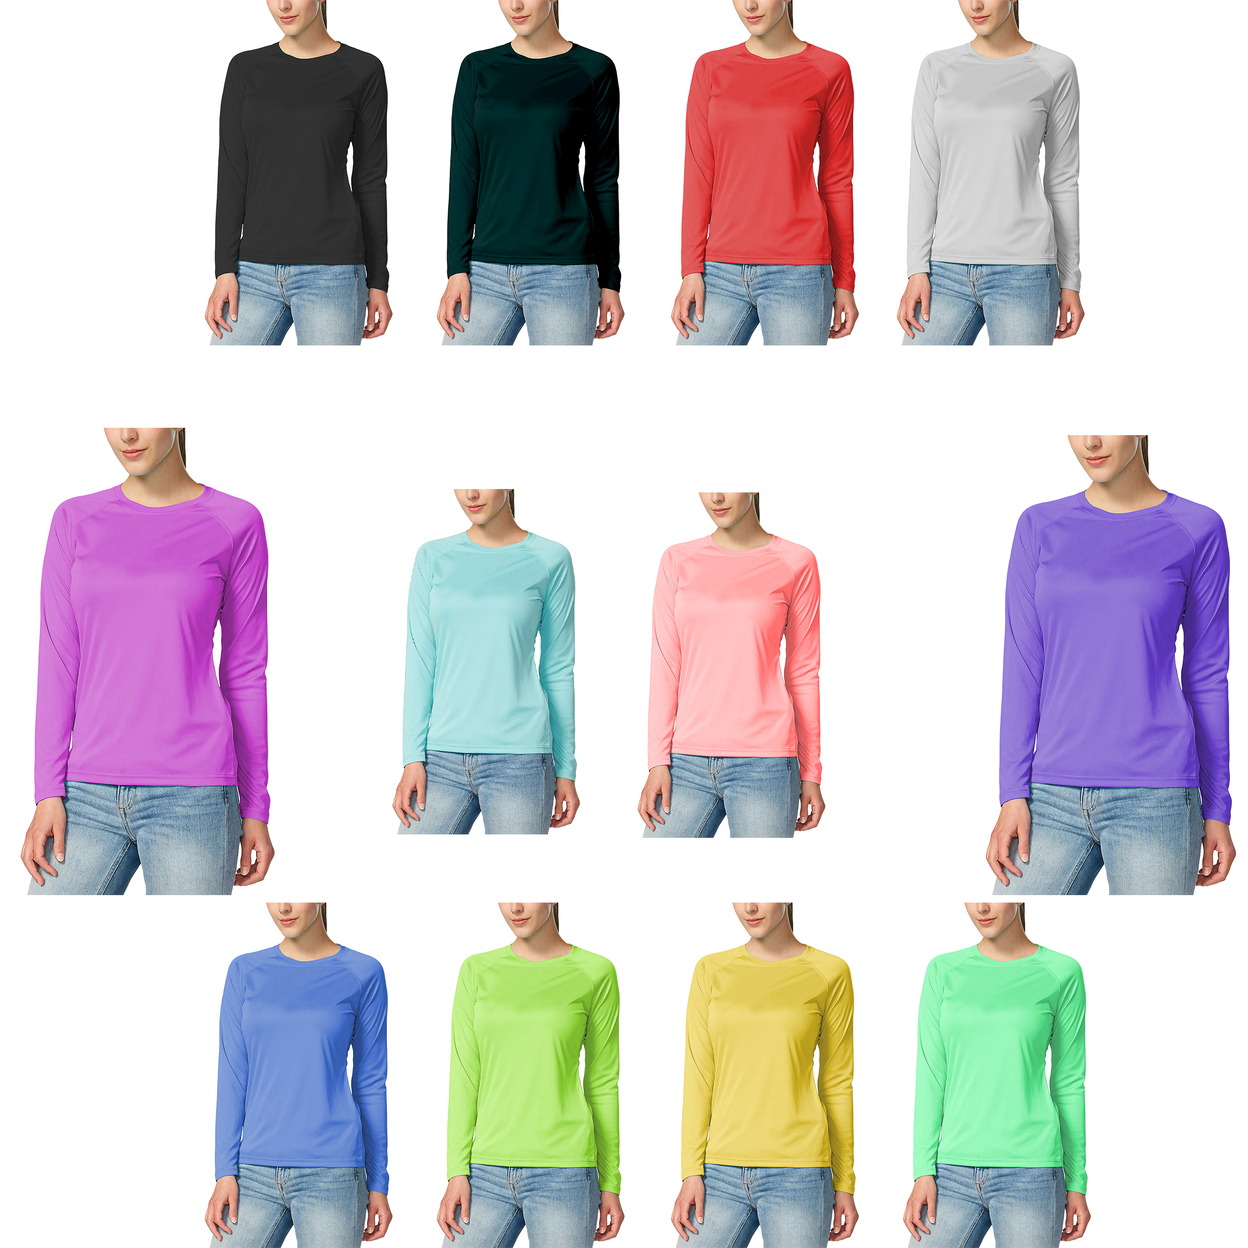 3-Pack: Women's Dri-Fit Moisture-Wicking Breathable Long Sleeve T-Shirt - Small